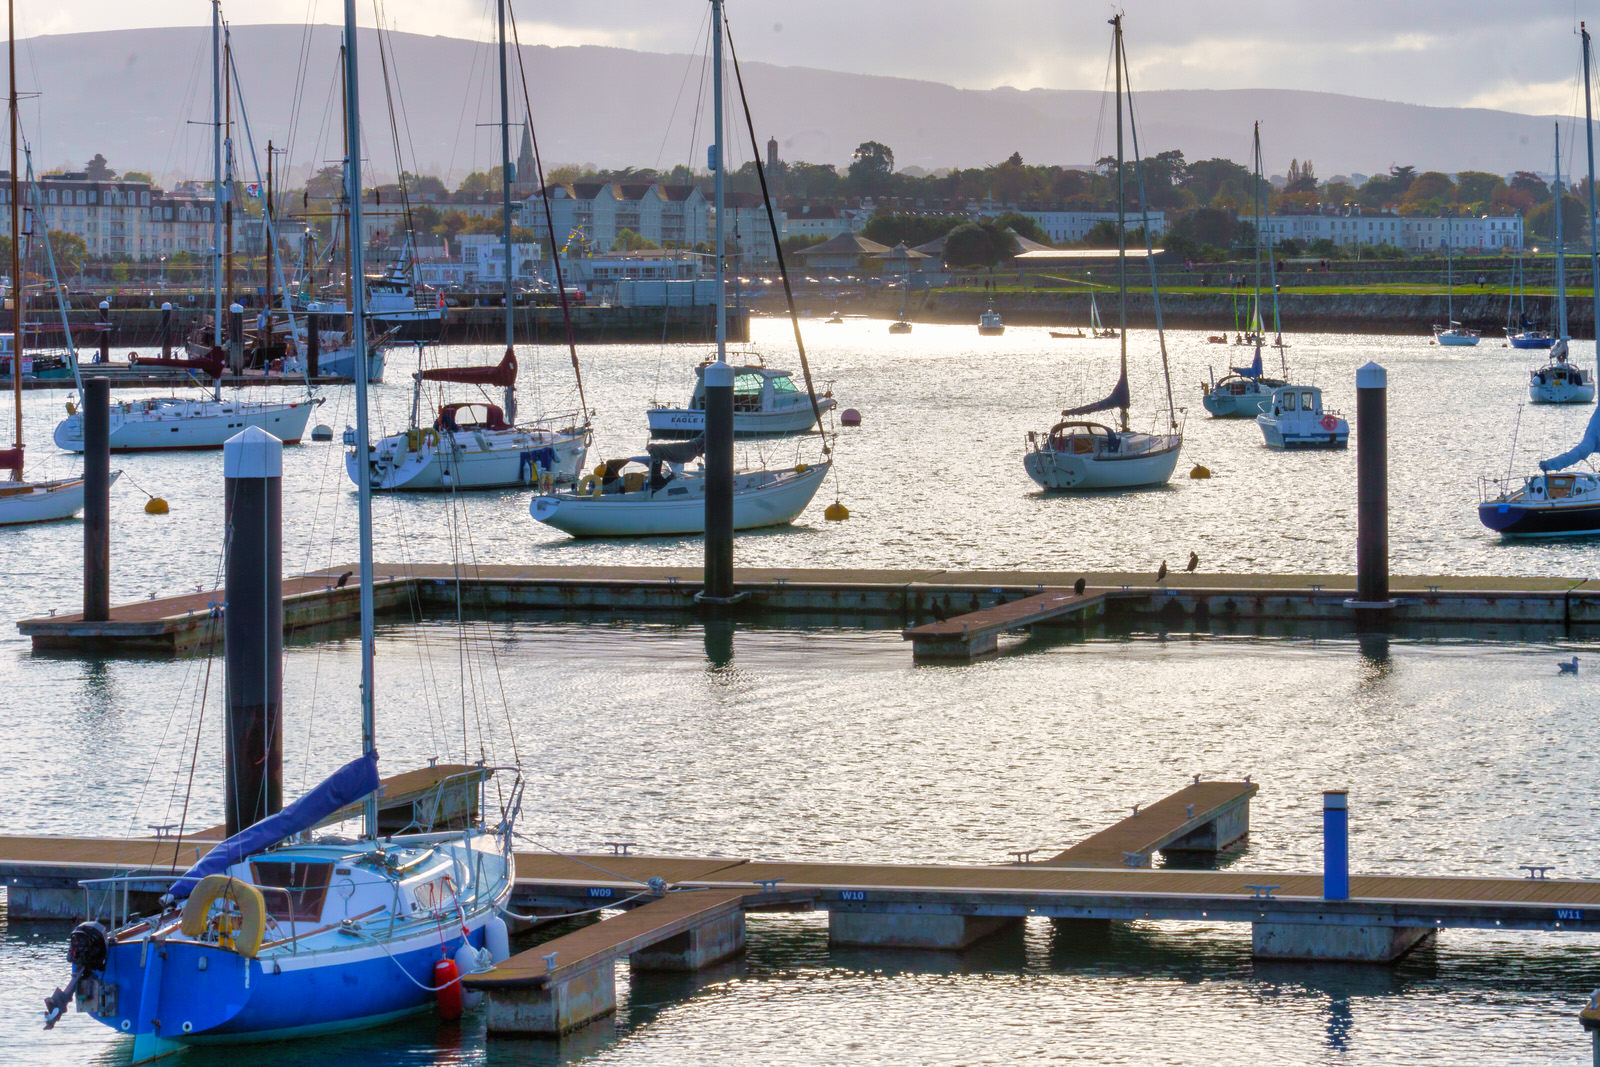 THE SECTION OF THE MARINA NEAR THE WESTERN BREAKWATER [DUN LAOGHAIRE HARBOUR]
 007